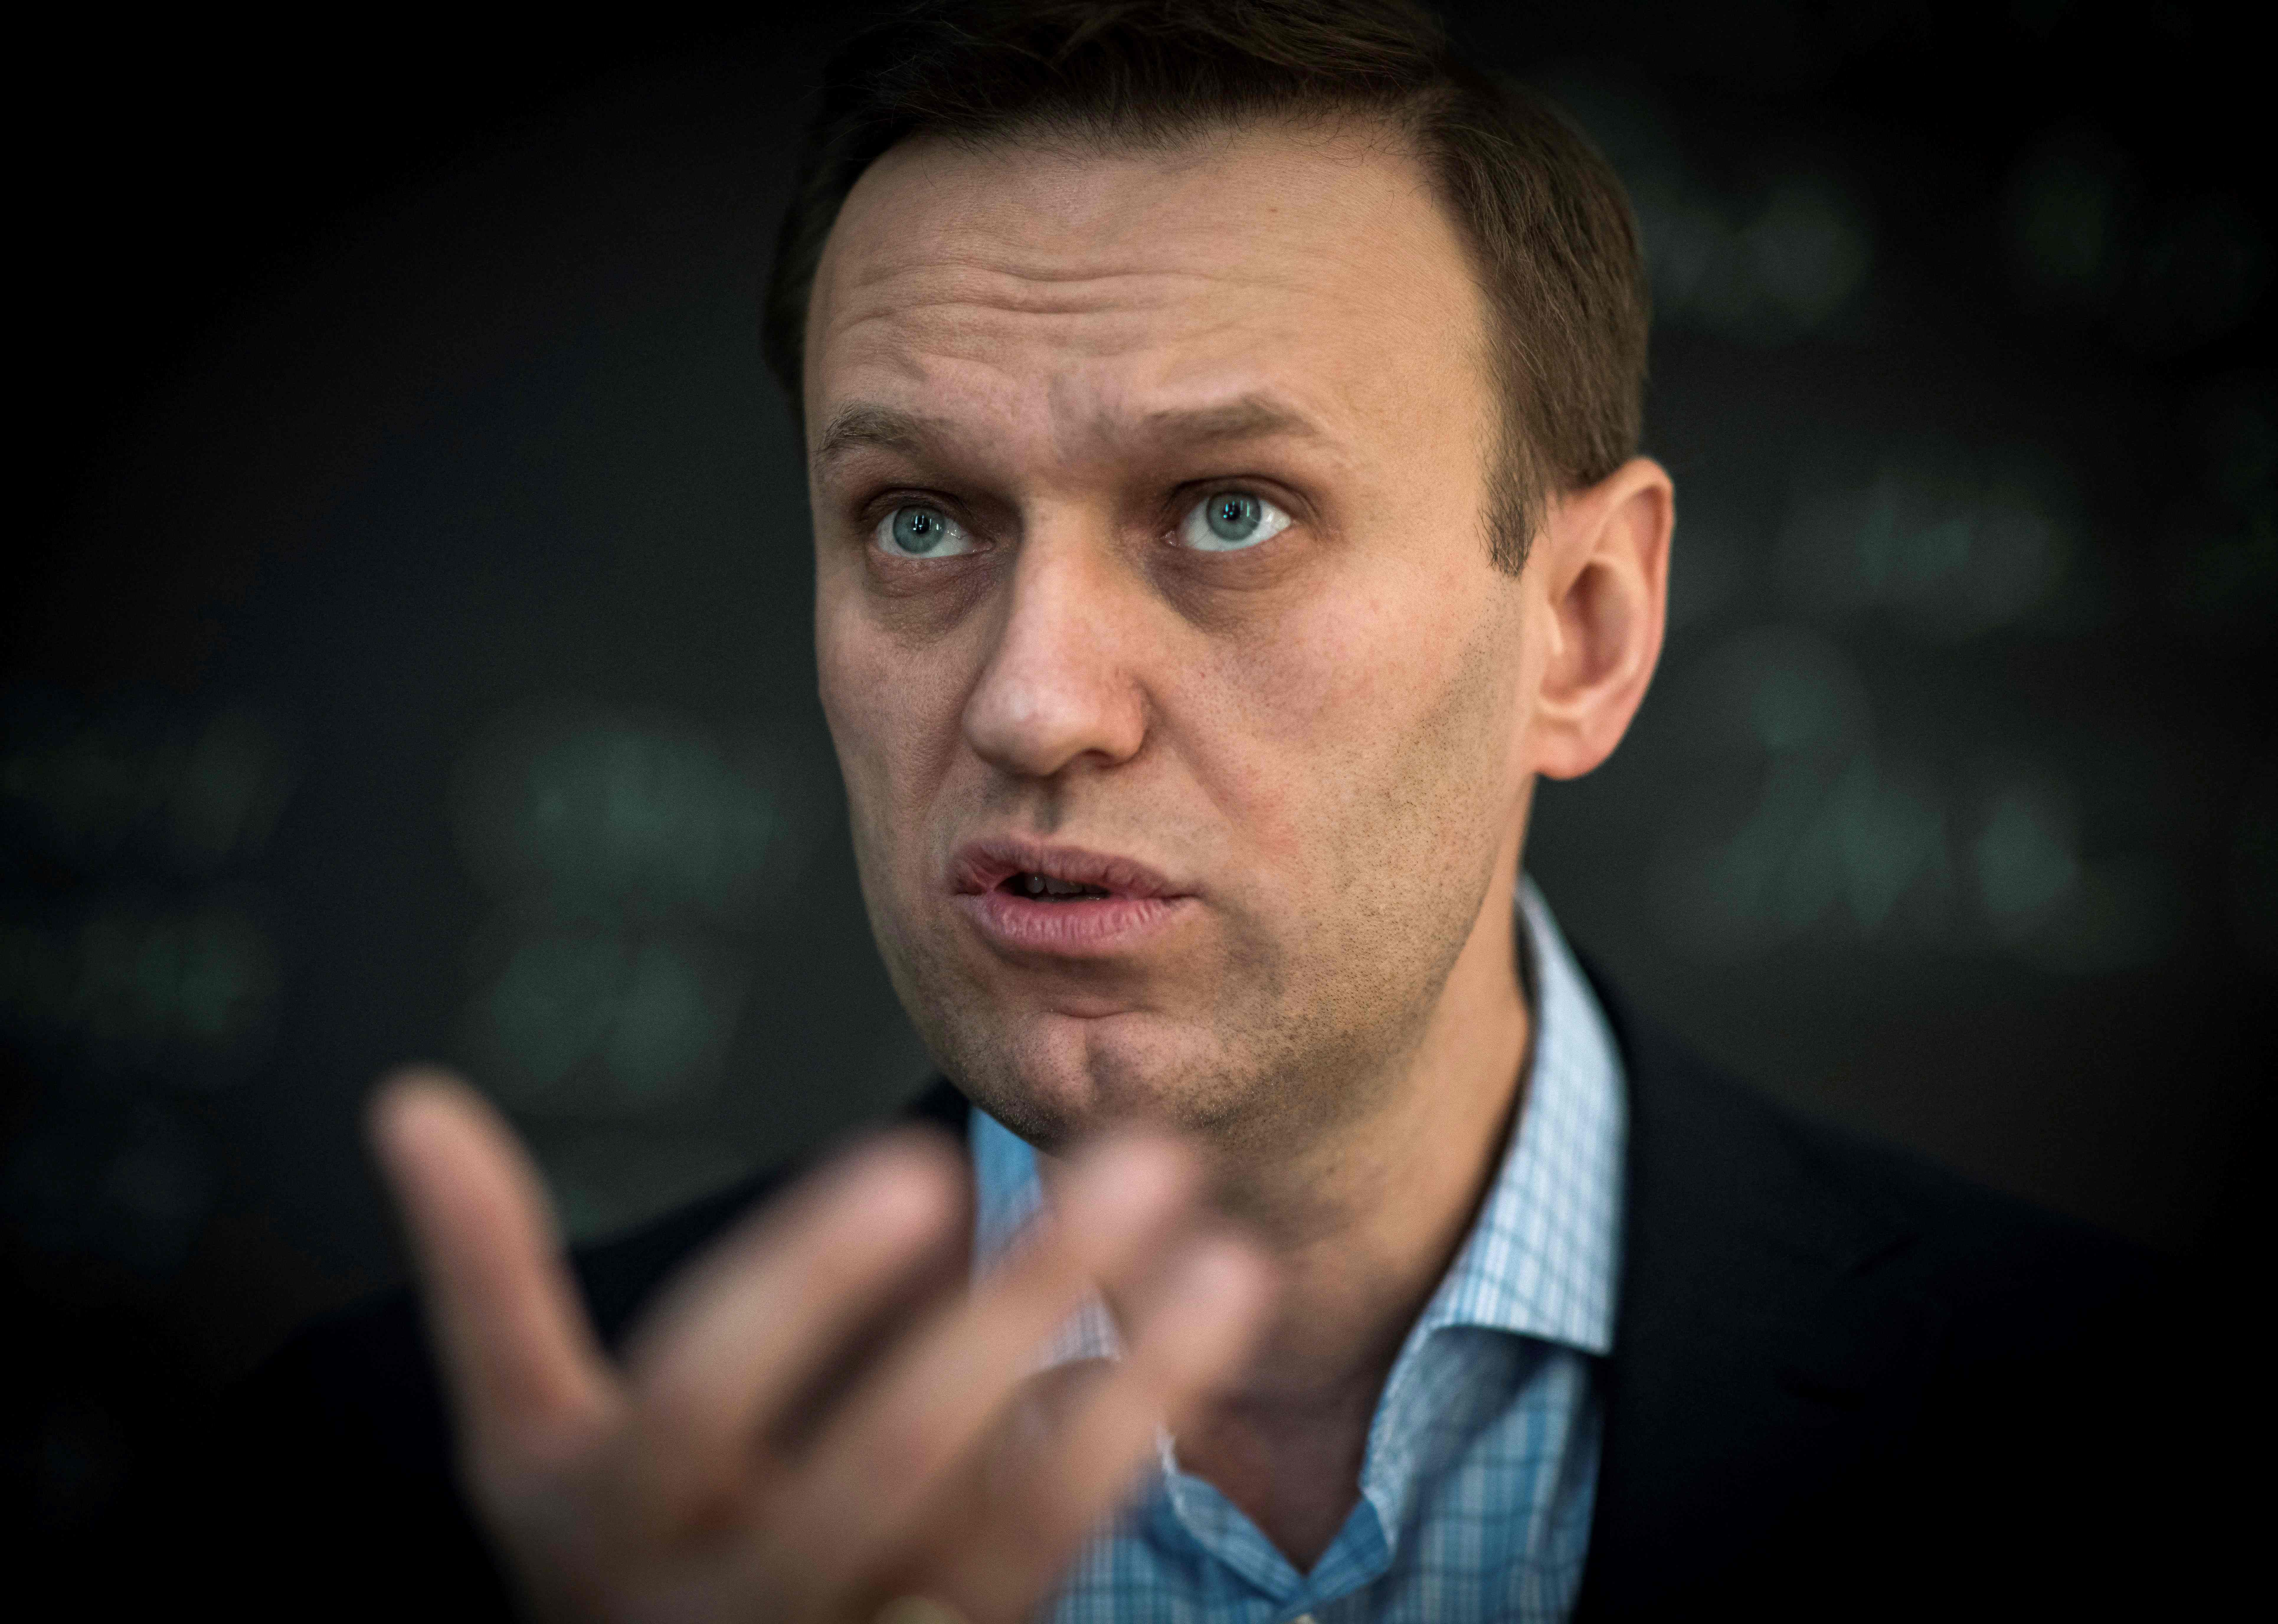 Alexey Navalny speaks during an interview in 2018.